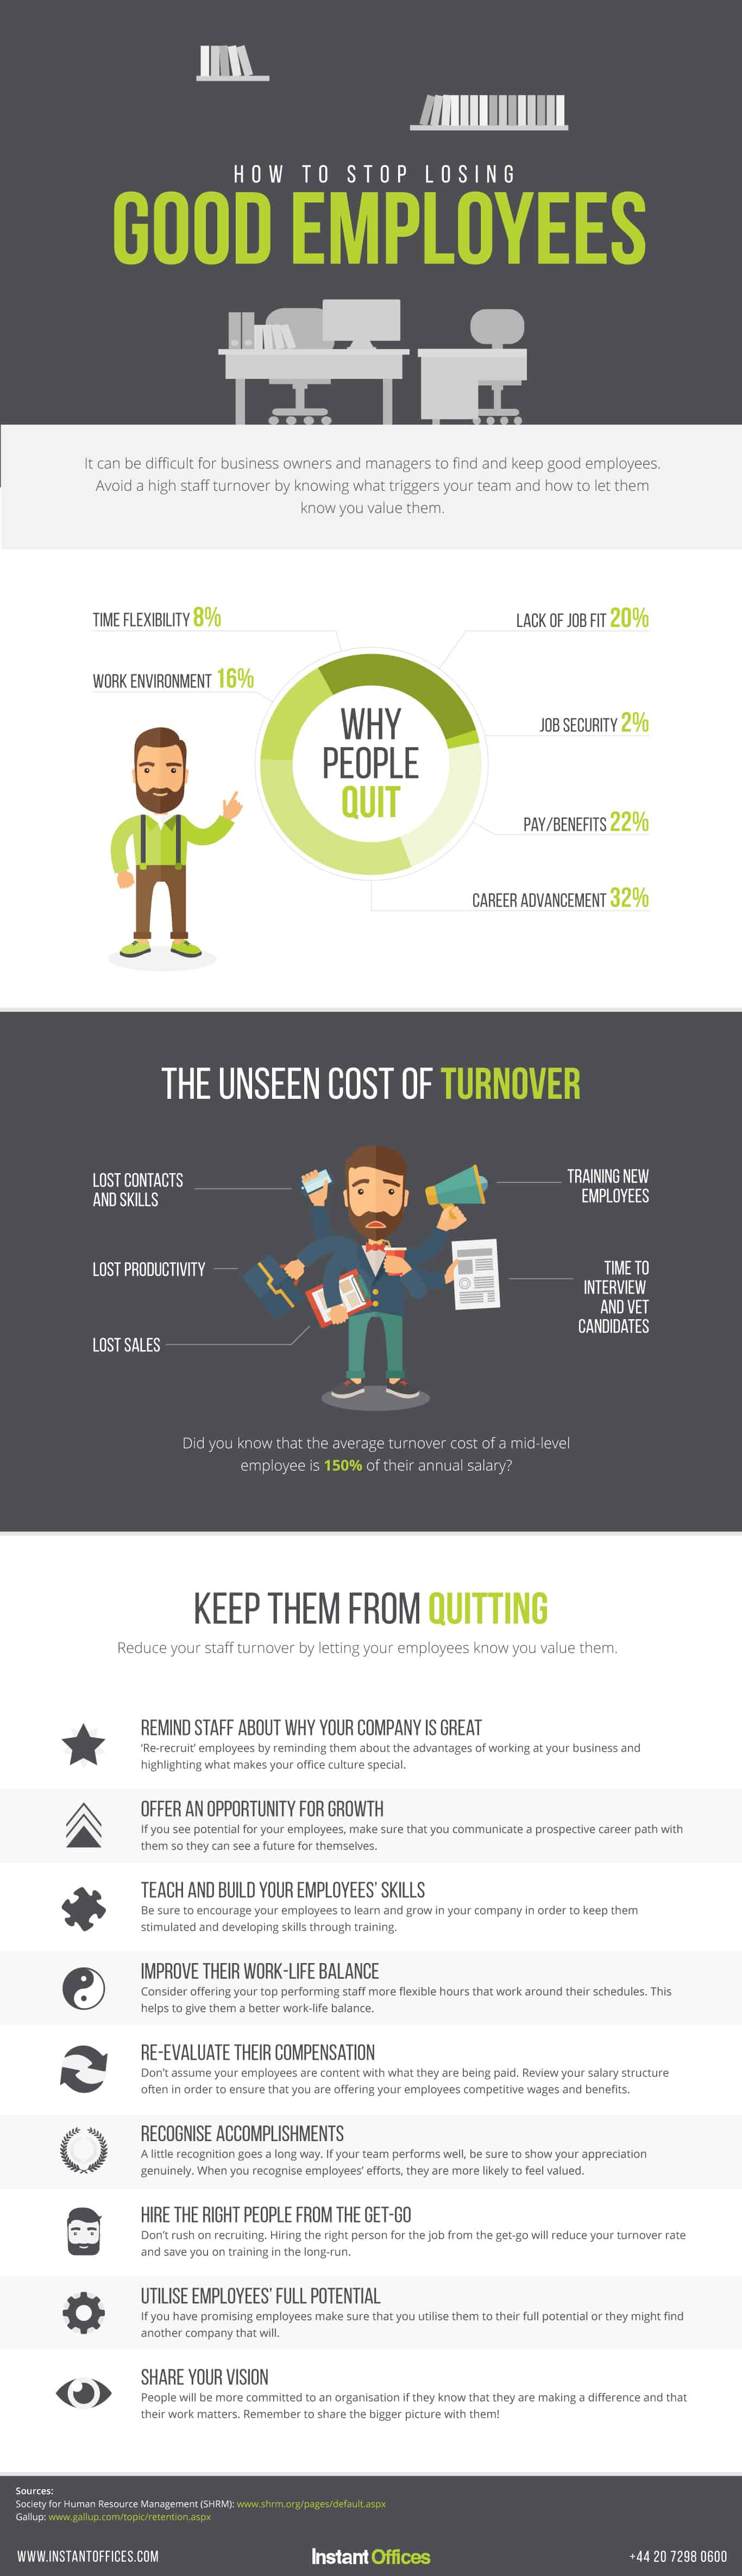 9 Ways to Avoid Losing Good Employees - An Infographic